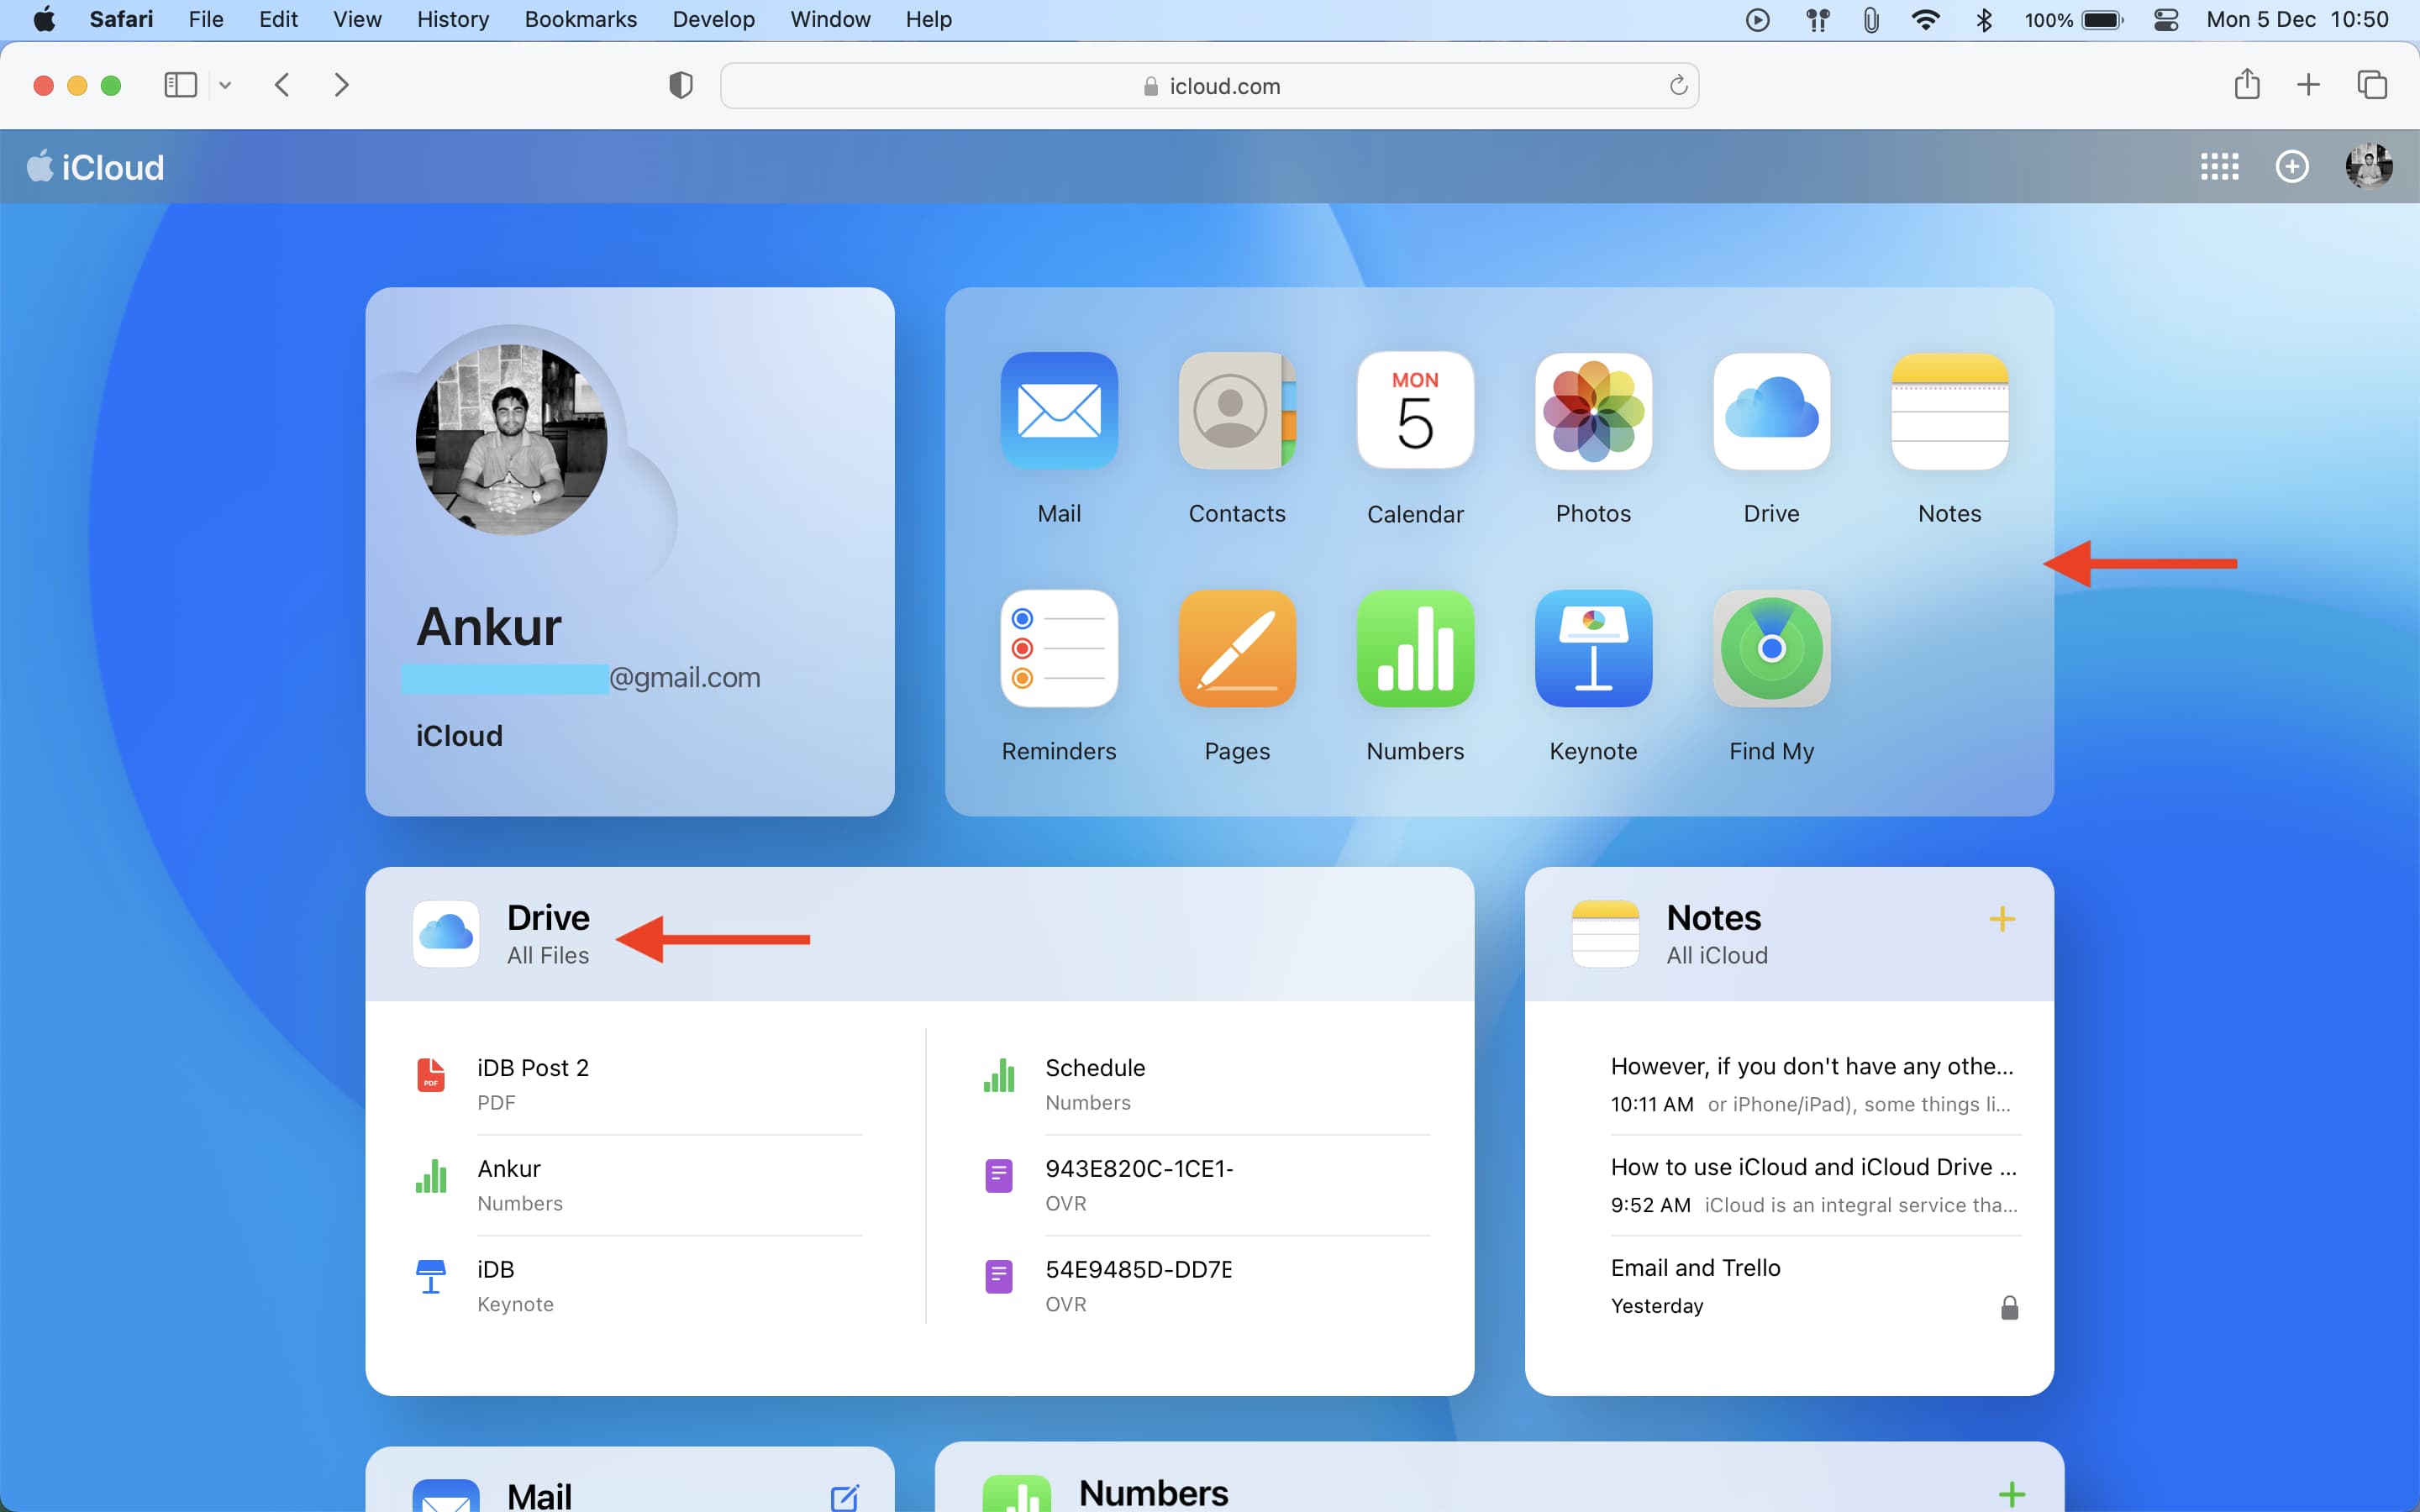 Accessing iCloud and iCloud Drive on web